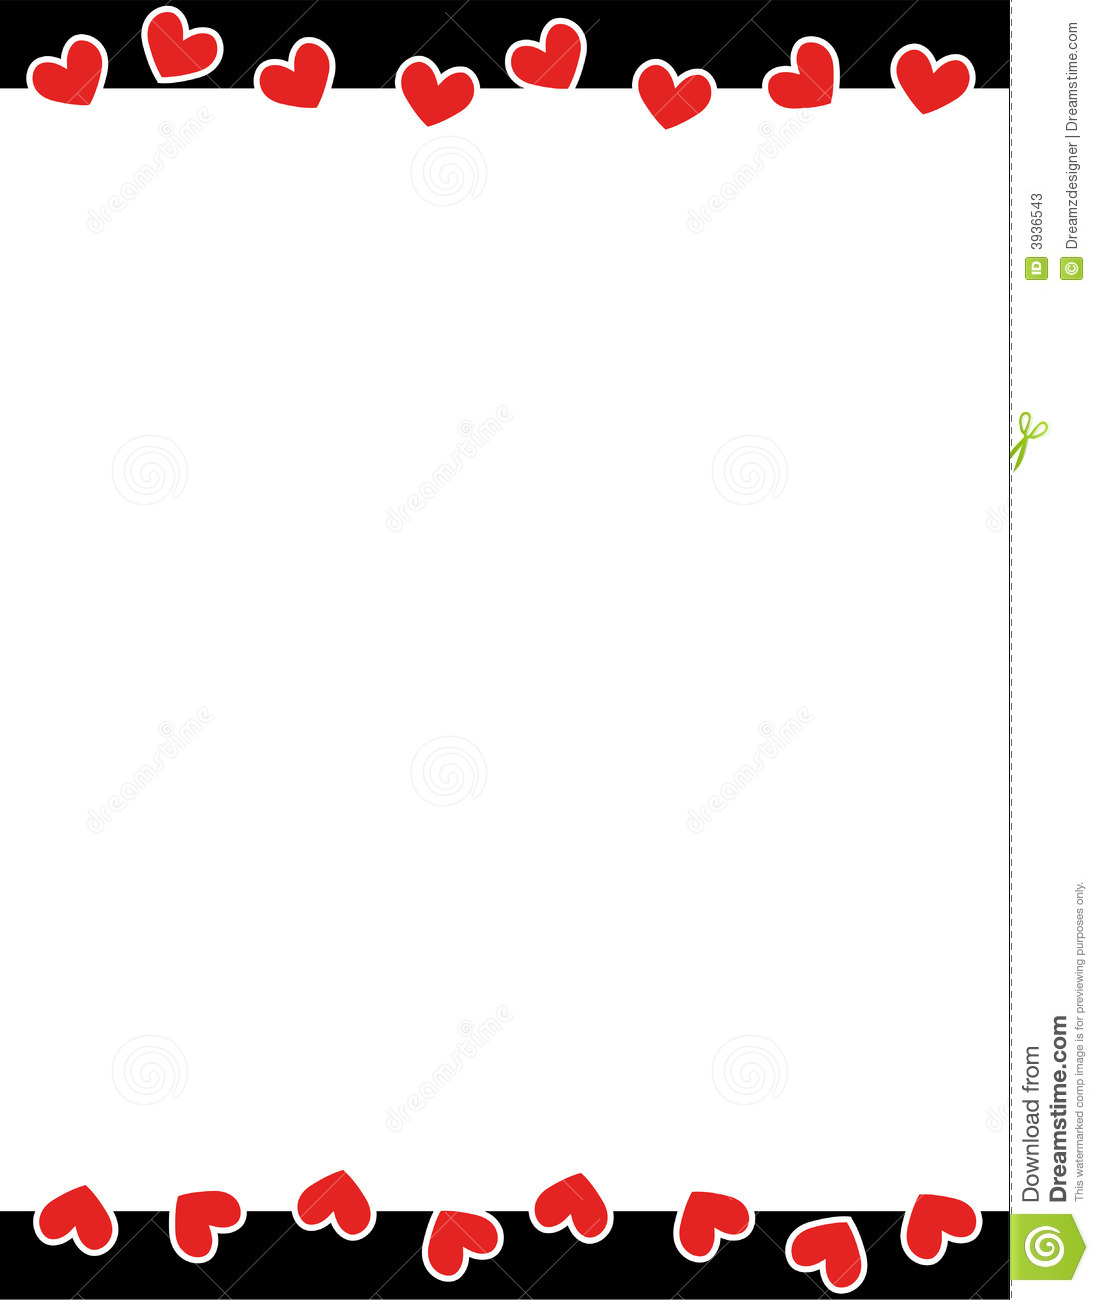 Clean Valentine S Day   Holiday  Love Border   With Red Hearts   For    